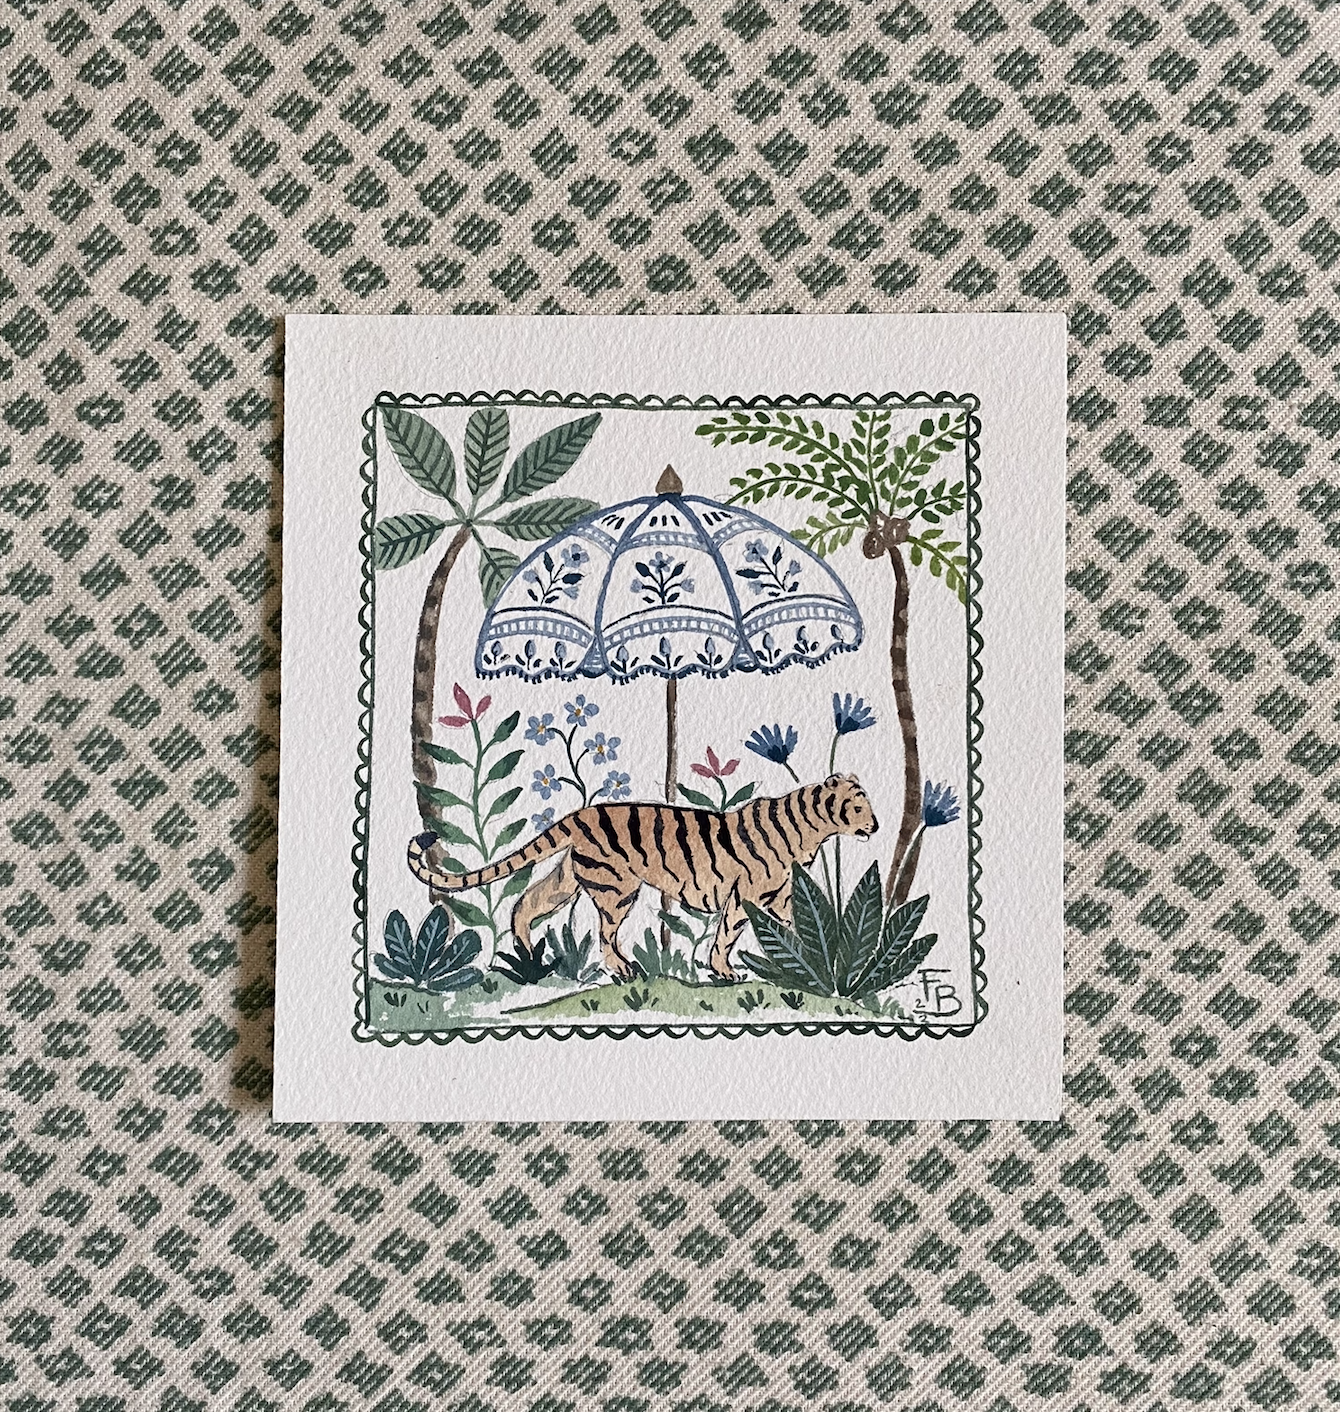 Miniature Watercolour painting - Tiger and parasol